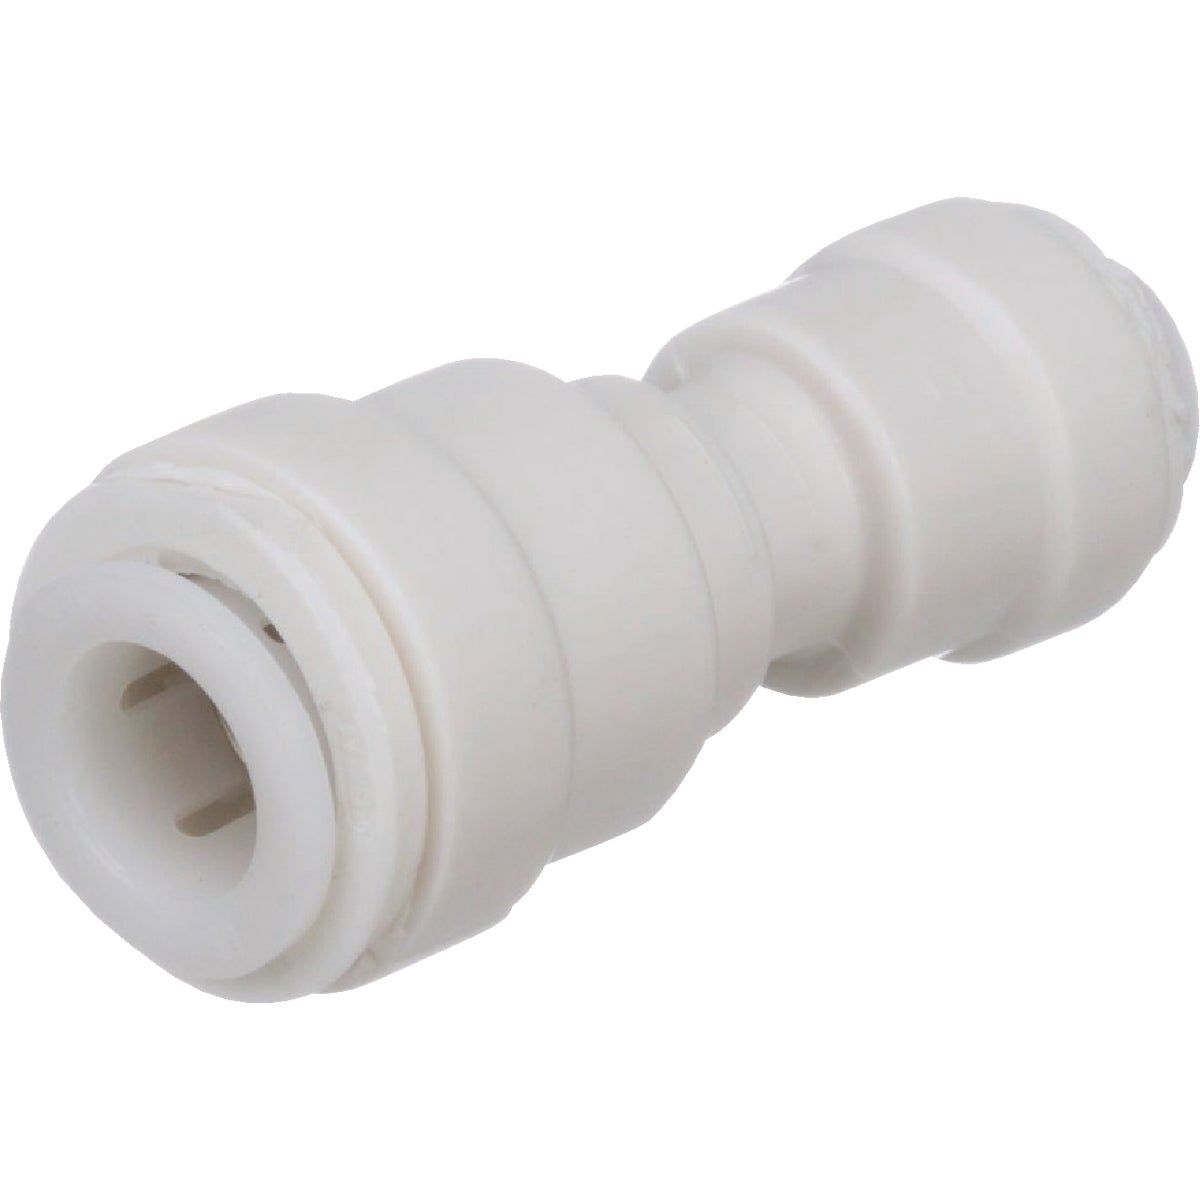 Watts Aqualock 3/8 In. x 1/4 In. Push-to-Connect Reducing Plastic Coupling